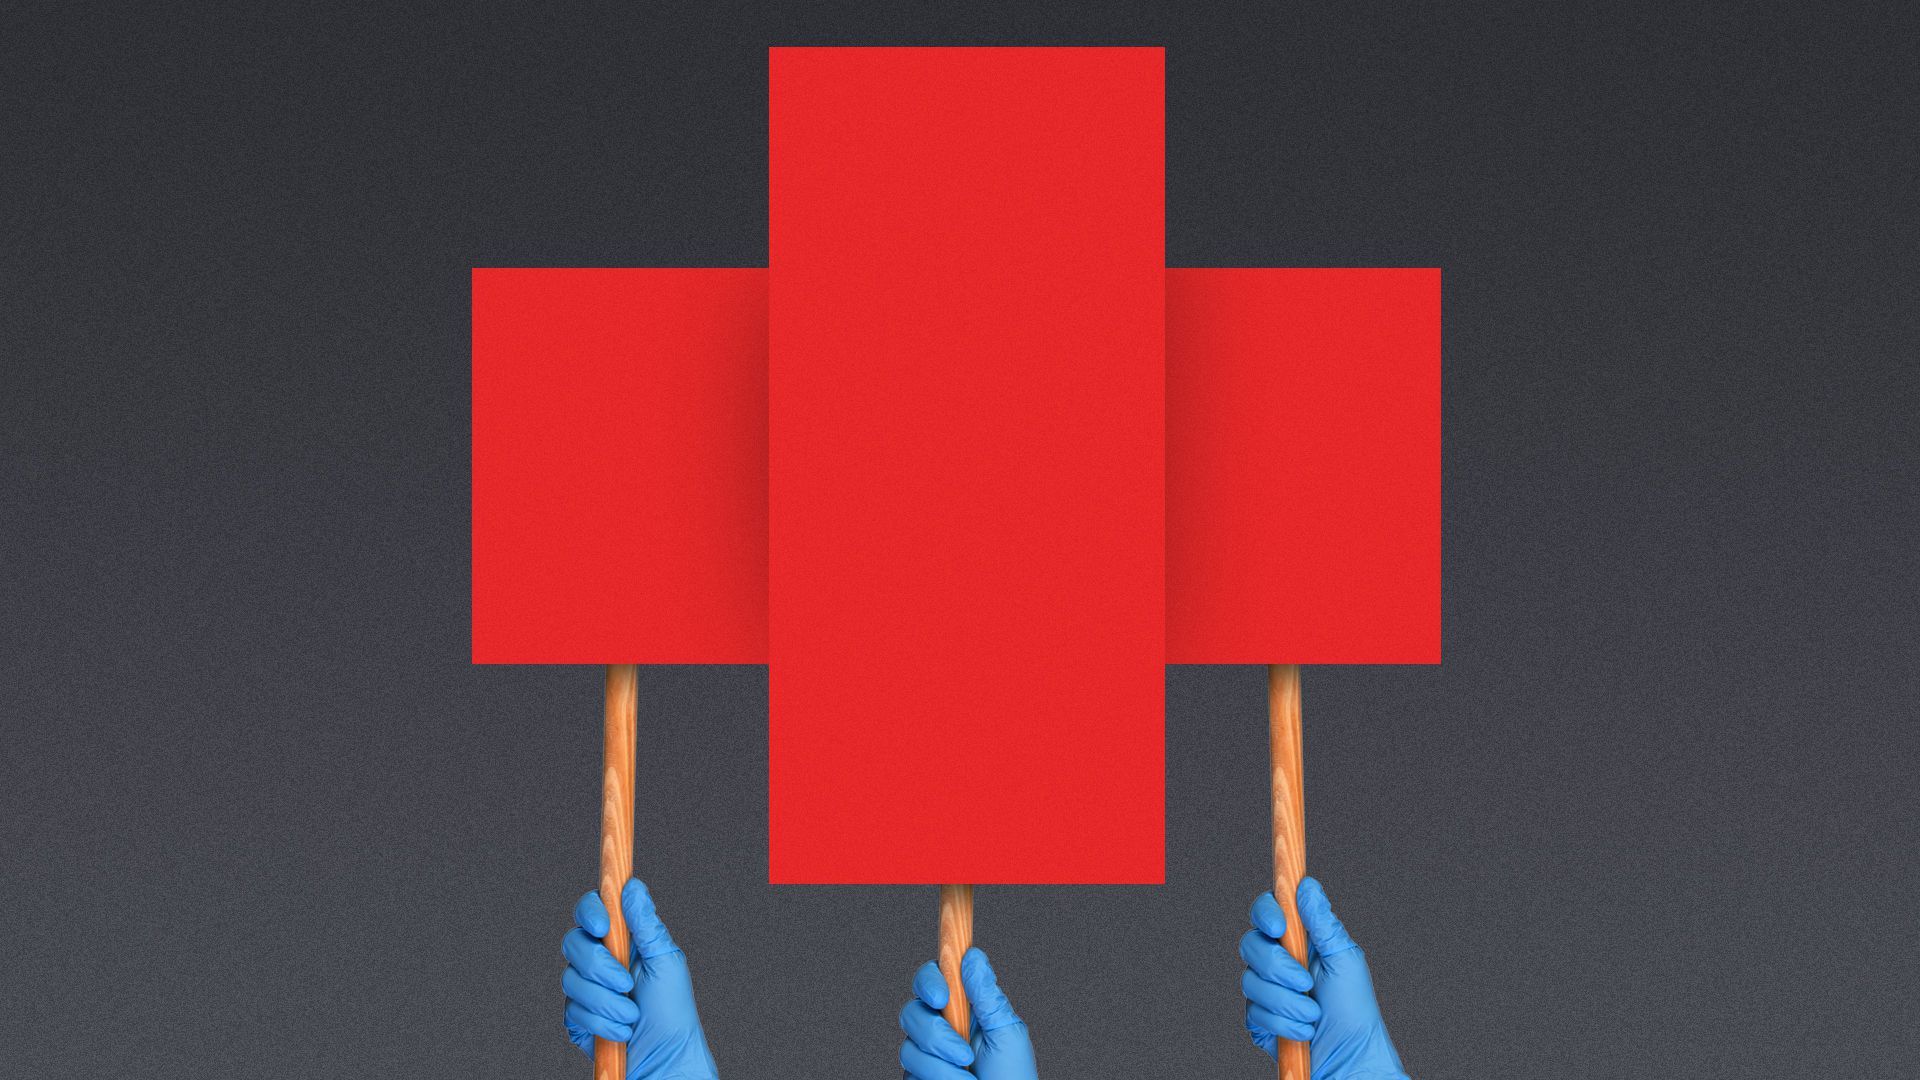 Health care workers hold up strike signs that make a red medical cross symbol.